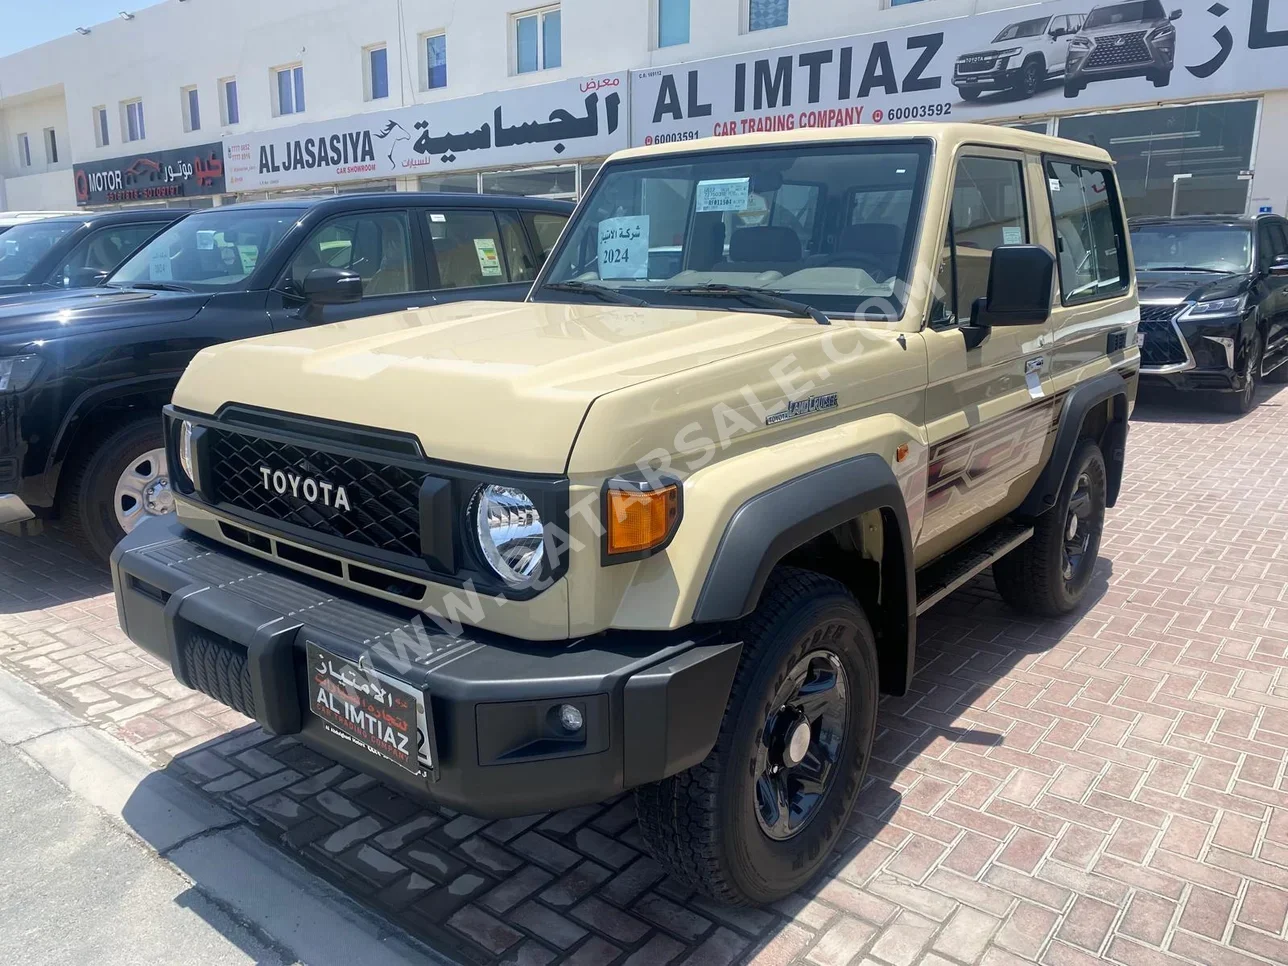 Toyota  Land Cruiser  Hard Top  2024  Manual  0 Km  6 Cylinder  Four Wheel Drive (4WD)  SUV  Beige  With Warranty